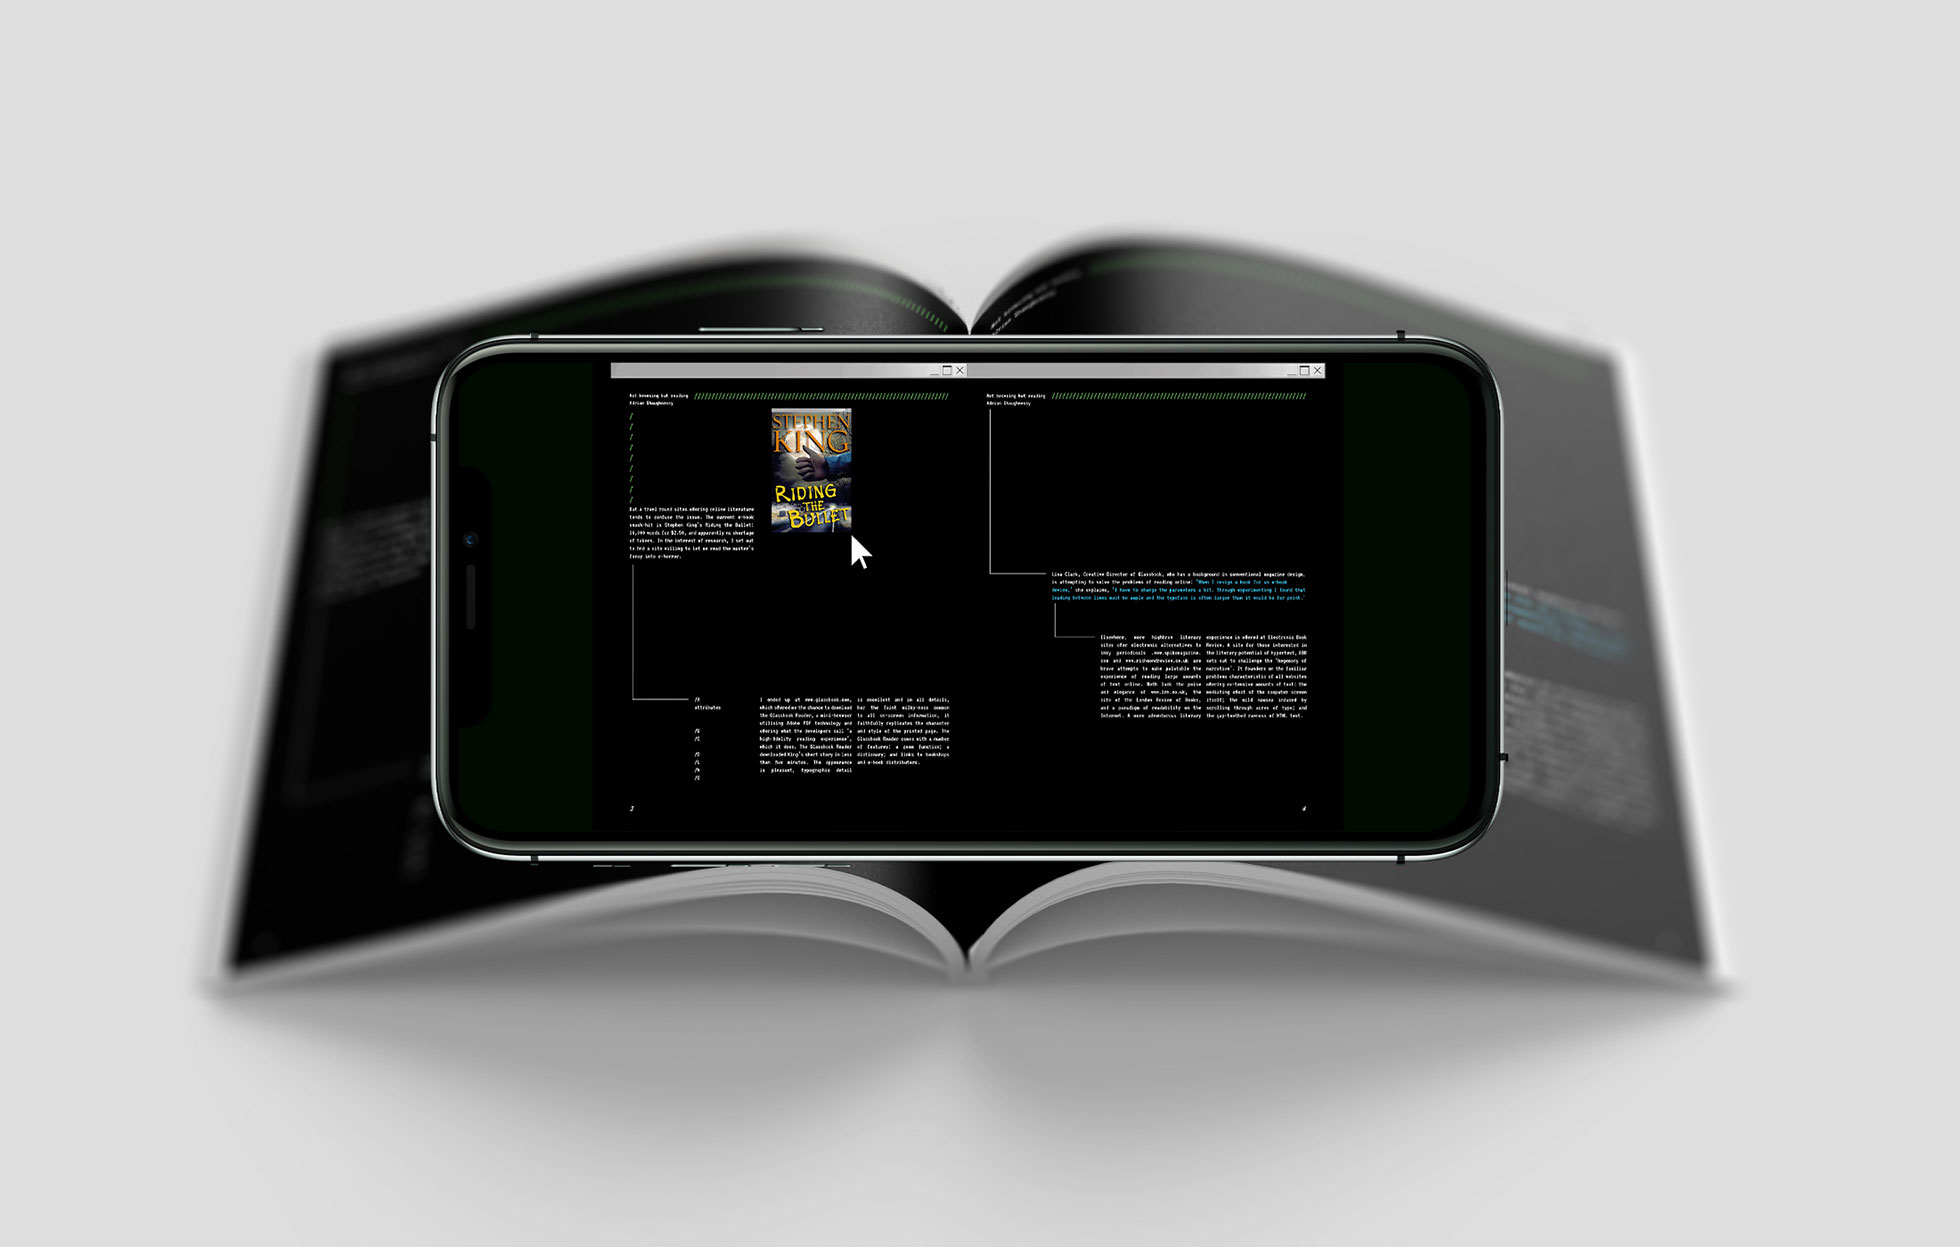 Smart phone above magazine showing AR motion graphics on screen